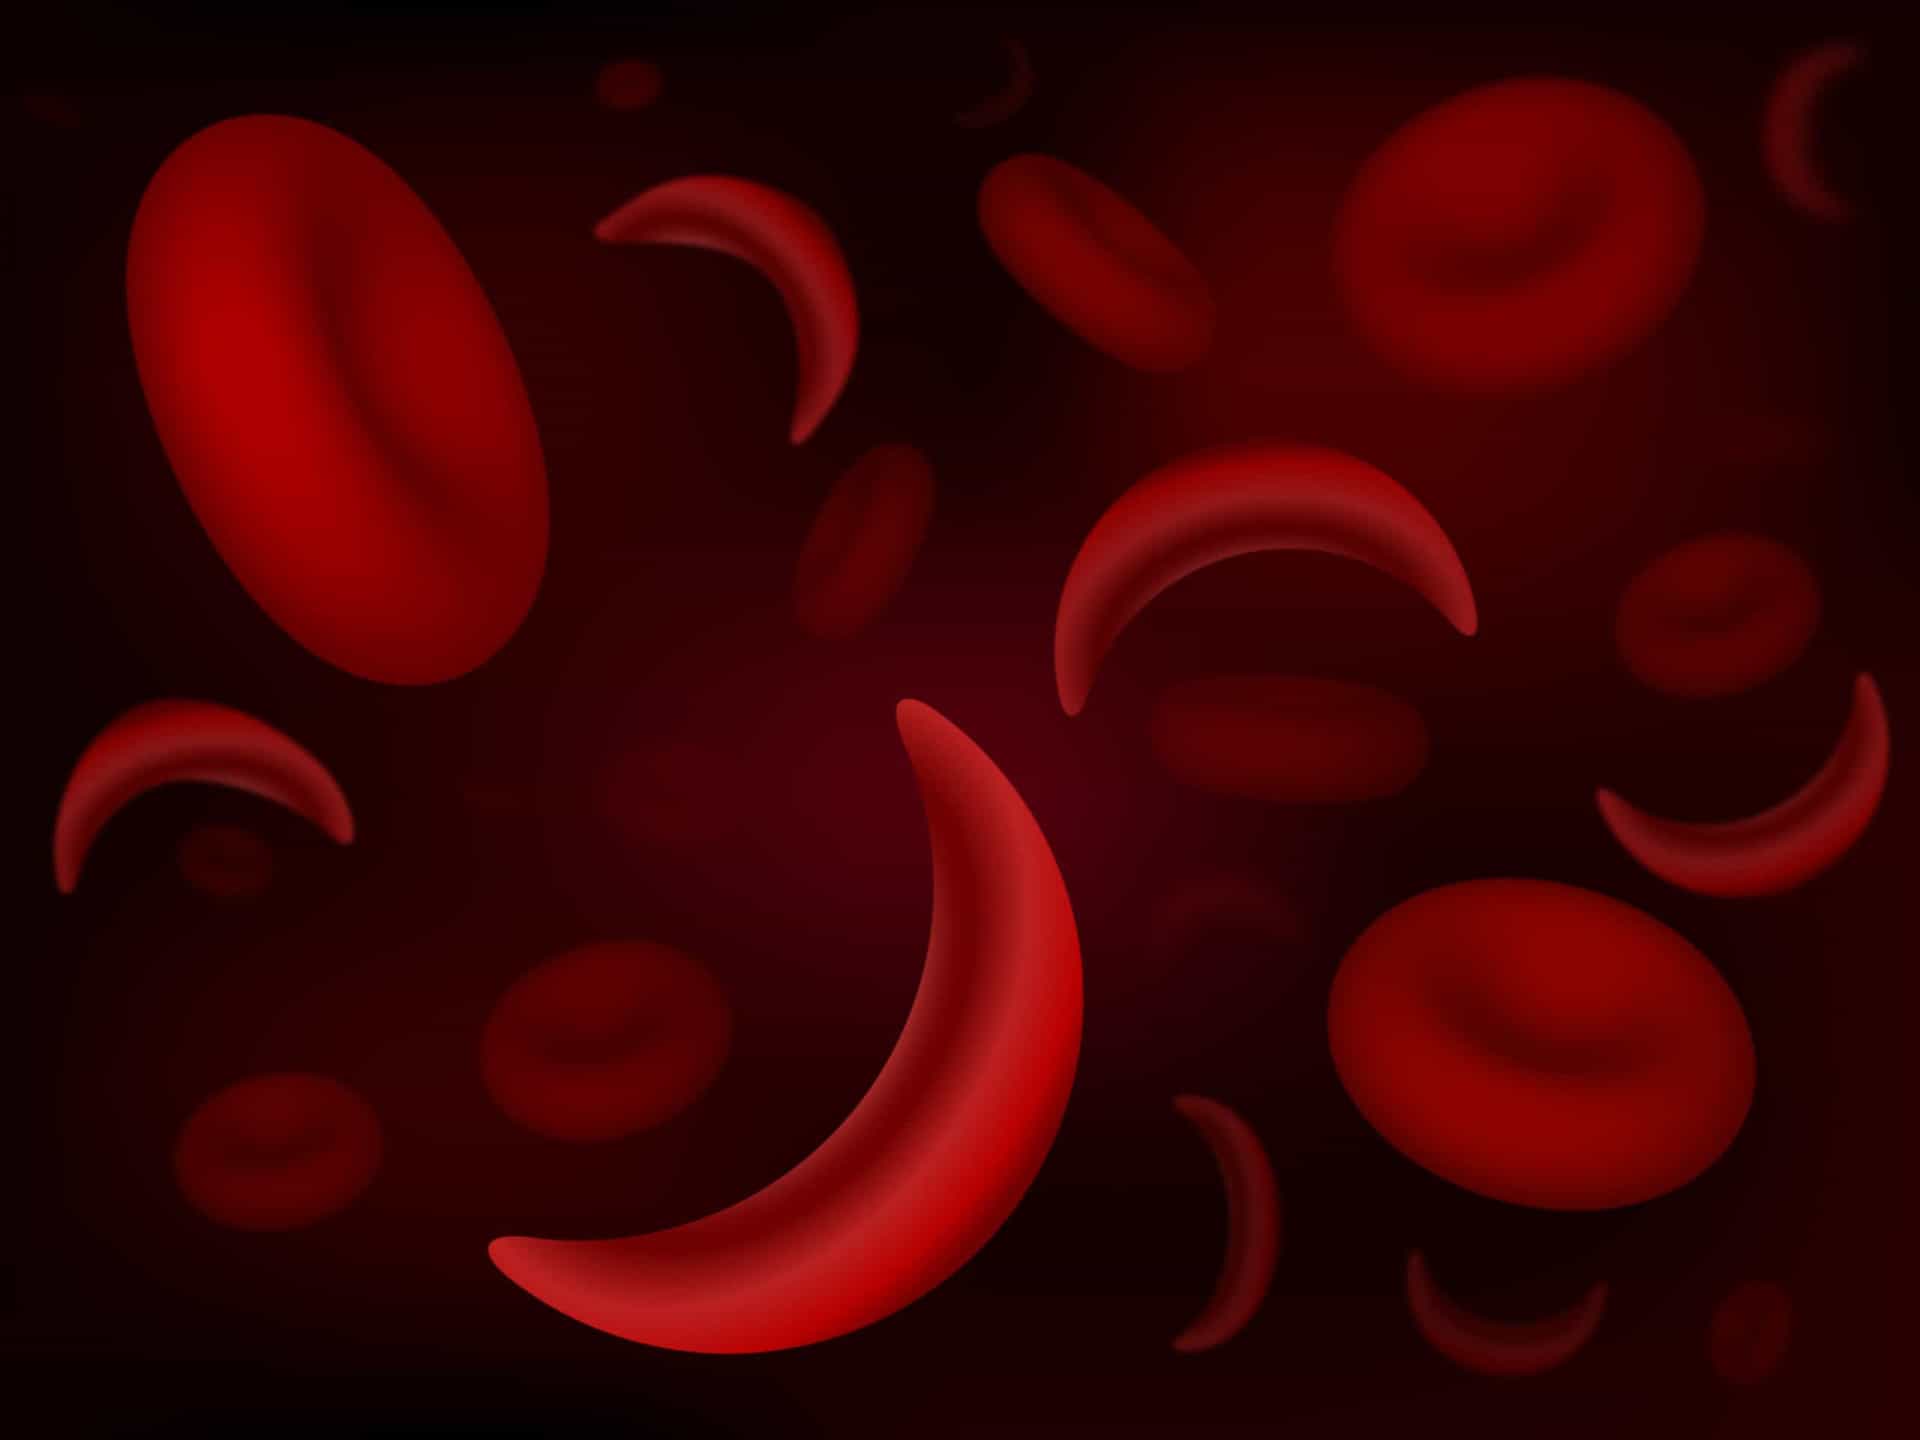 <p>Sickle cells simply gain their name from their shape. As opposed to the round, globulous figure of healthy red blood cells, sickle cells take on a crescent shape, like that of a, you guessed it, sickle.</p><p><a href="https://www.msn.com/en-us/community/channel/vid-7xx8mnucu55yw63we9va2gwr7uihbxwc68fxqp25x6tg4ftibpra?cvid=94631541bc0f4f89bfd59158d696ad7e">Follow us and access great exclusive content everyday</a></p>